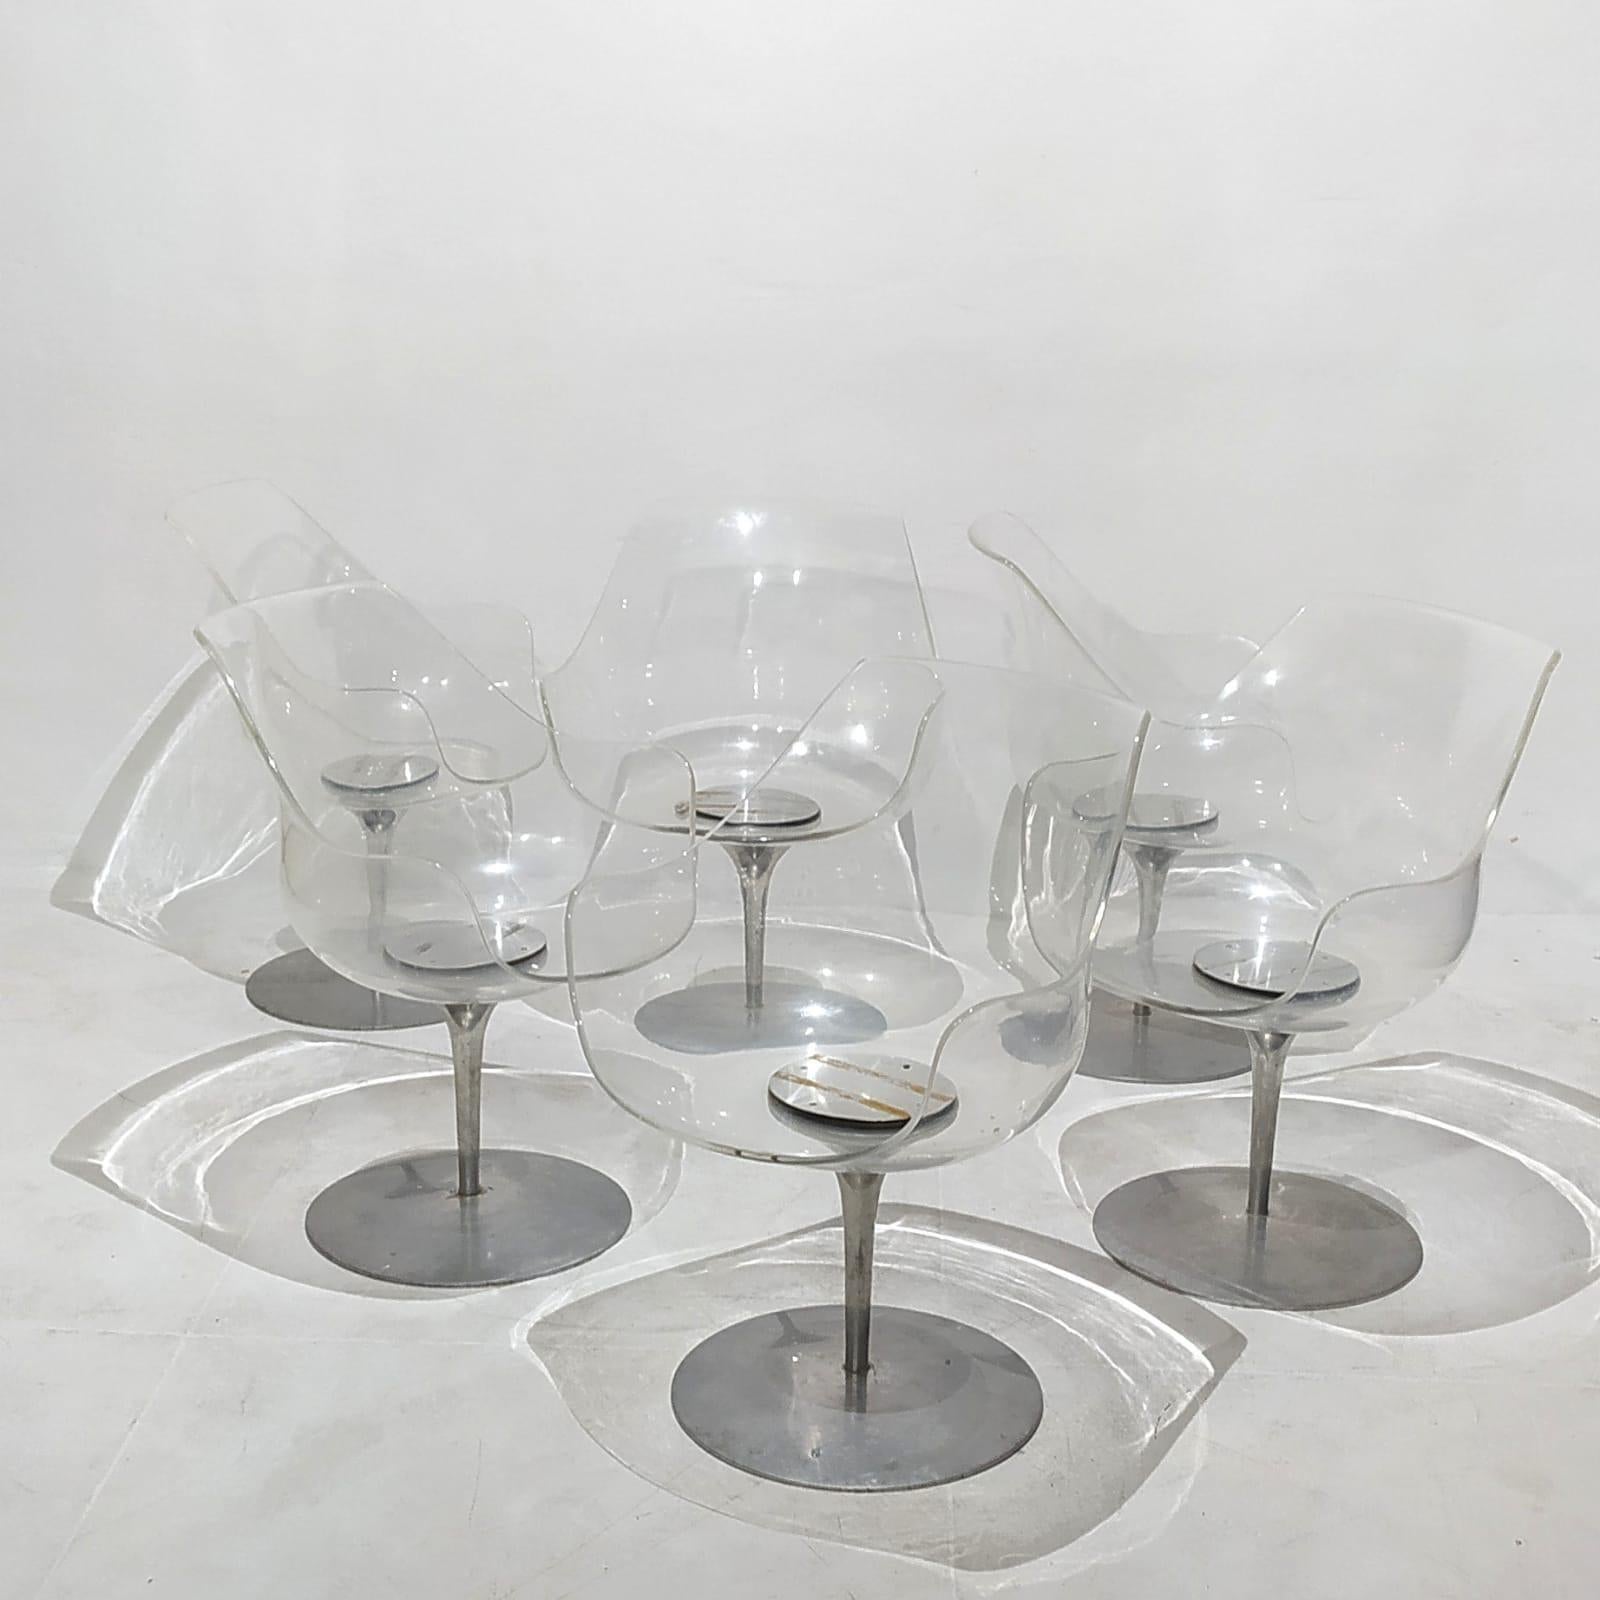 Very Rare and complete Set of four (4) Champagner chairs designed by Erwine & Estelle Laverne, France circa 1960s

Great design with it’s transparent lucite seat shell and Aluminum base, the Champagner chair is both highly conformable and uniquely